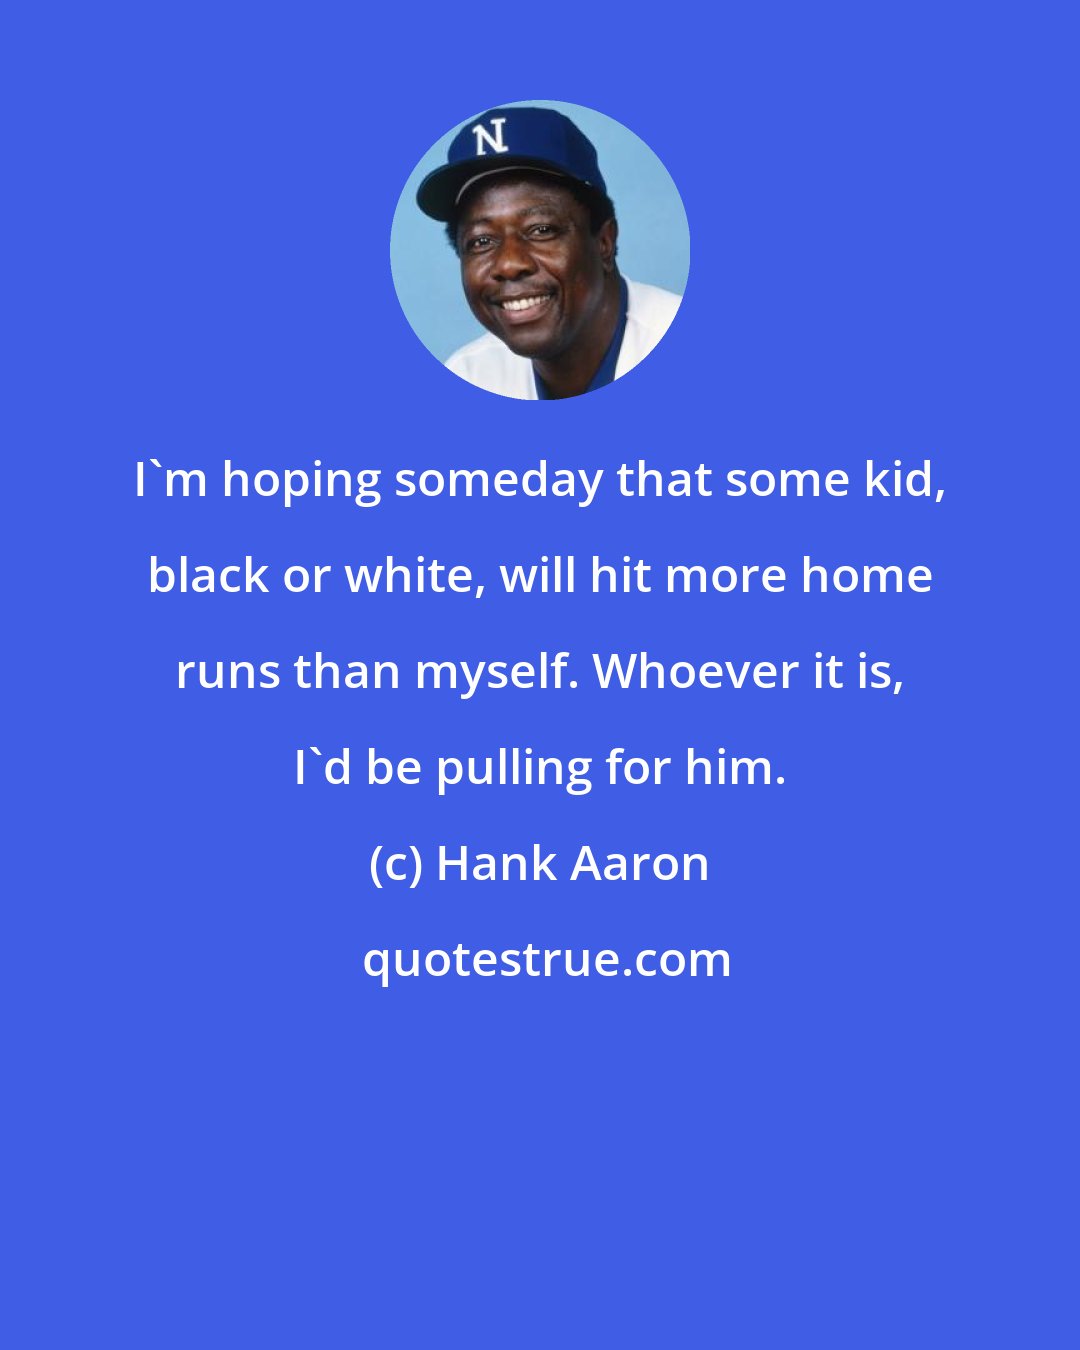 Hank Aaron: I'm hoping someday that some kid, black or white, will hit more home runs than myself. Whoever it is, I'd be pulling for him.